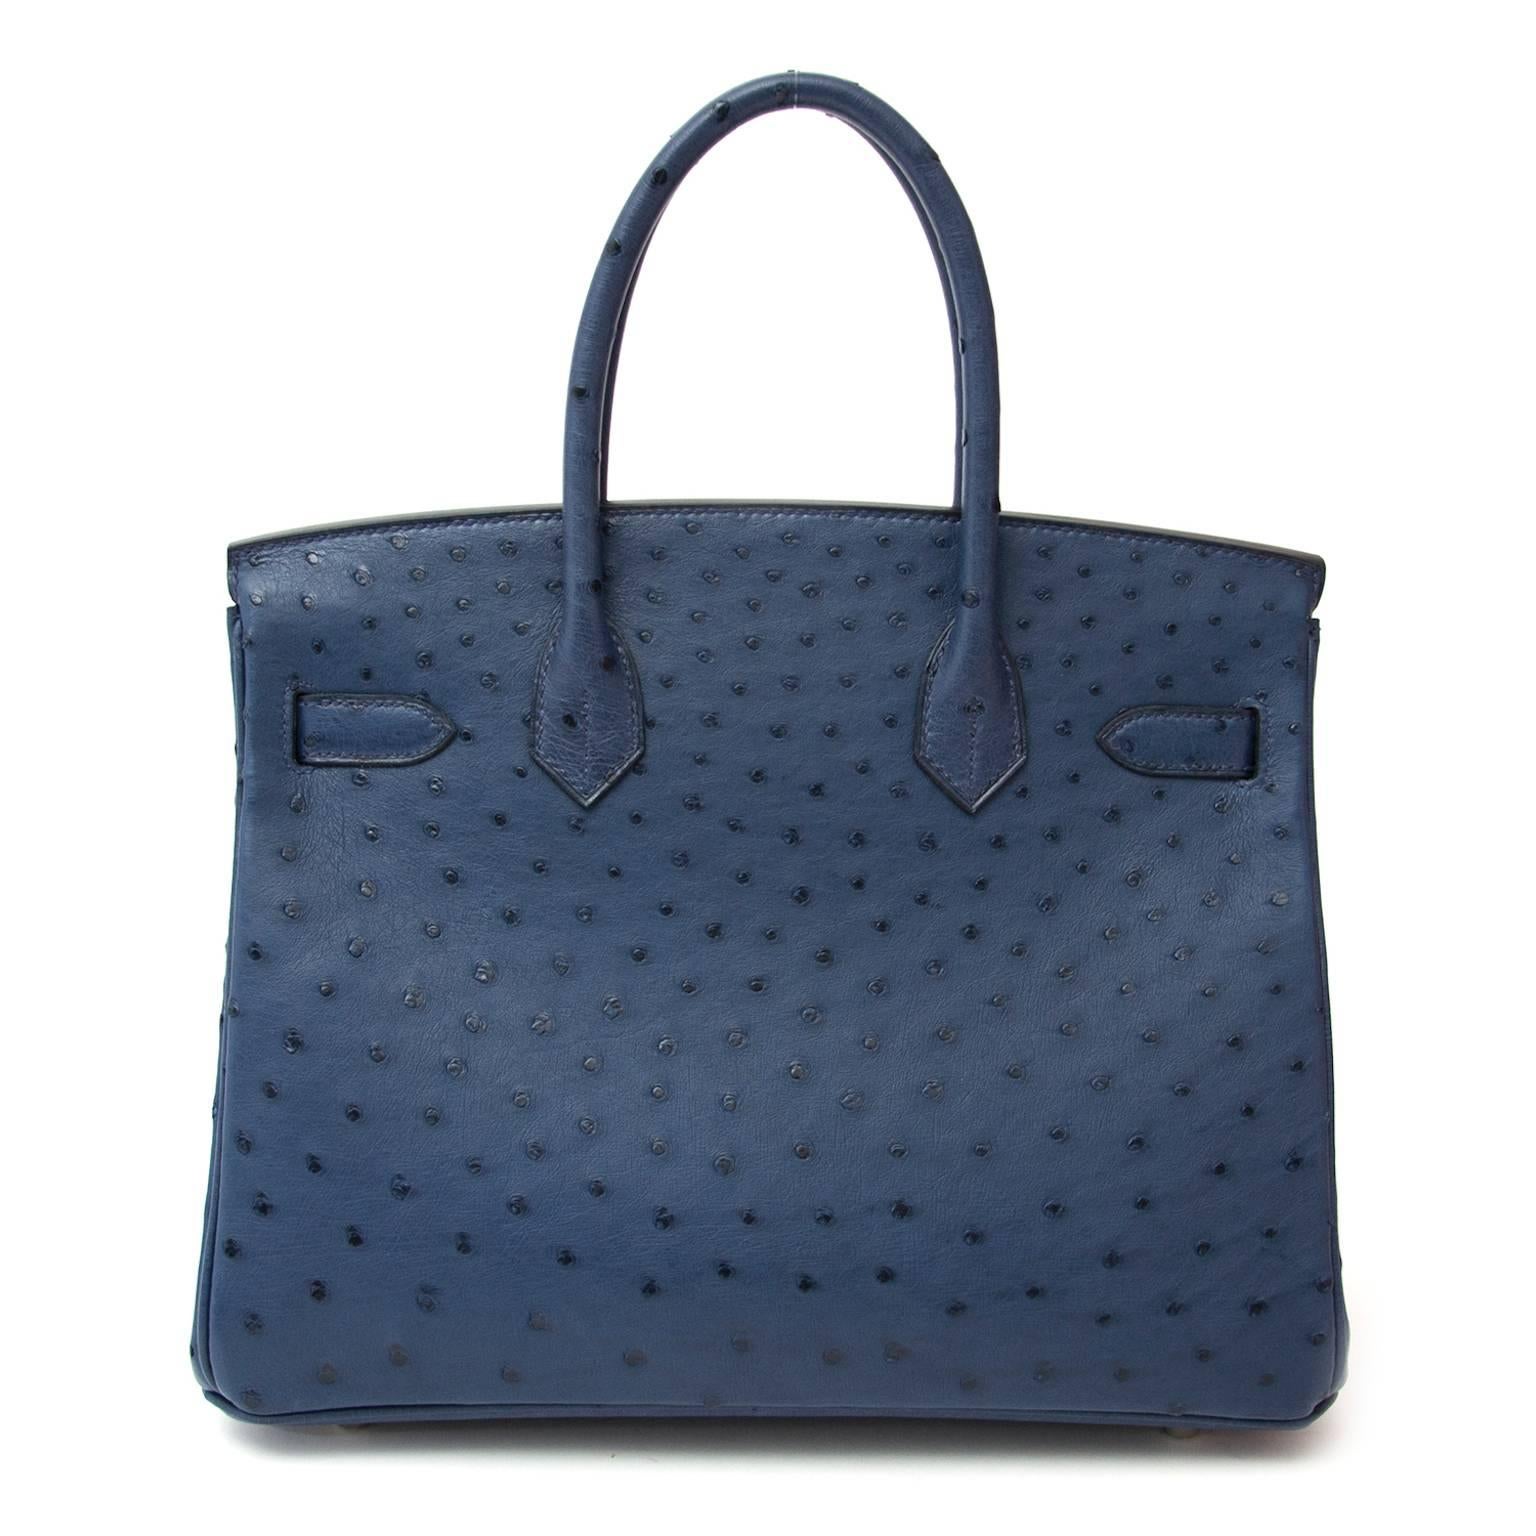 Impeccable Hermès Birkin bag in one of Hermes most beautiful blue tones “bleu de malte” with palladium hardware. Hermès bags are considered the ultimate luxury item worldwide. 

It is quite rare in this exotic variety of Ostrich skin with